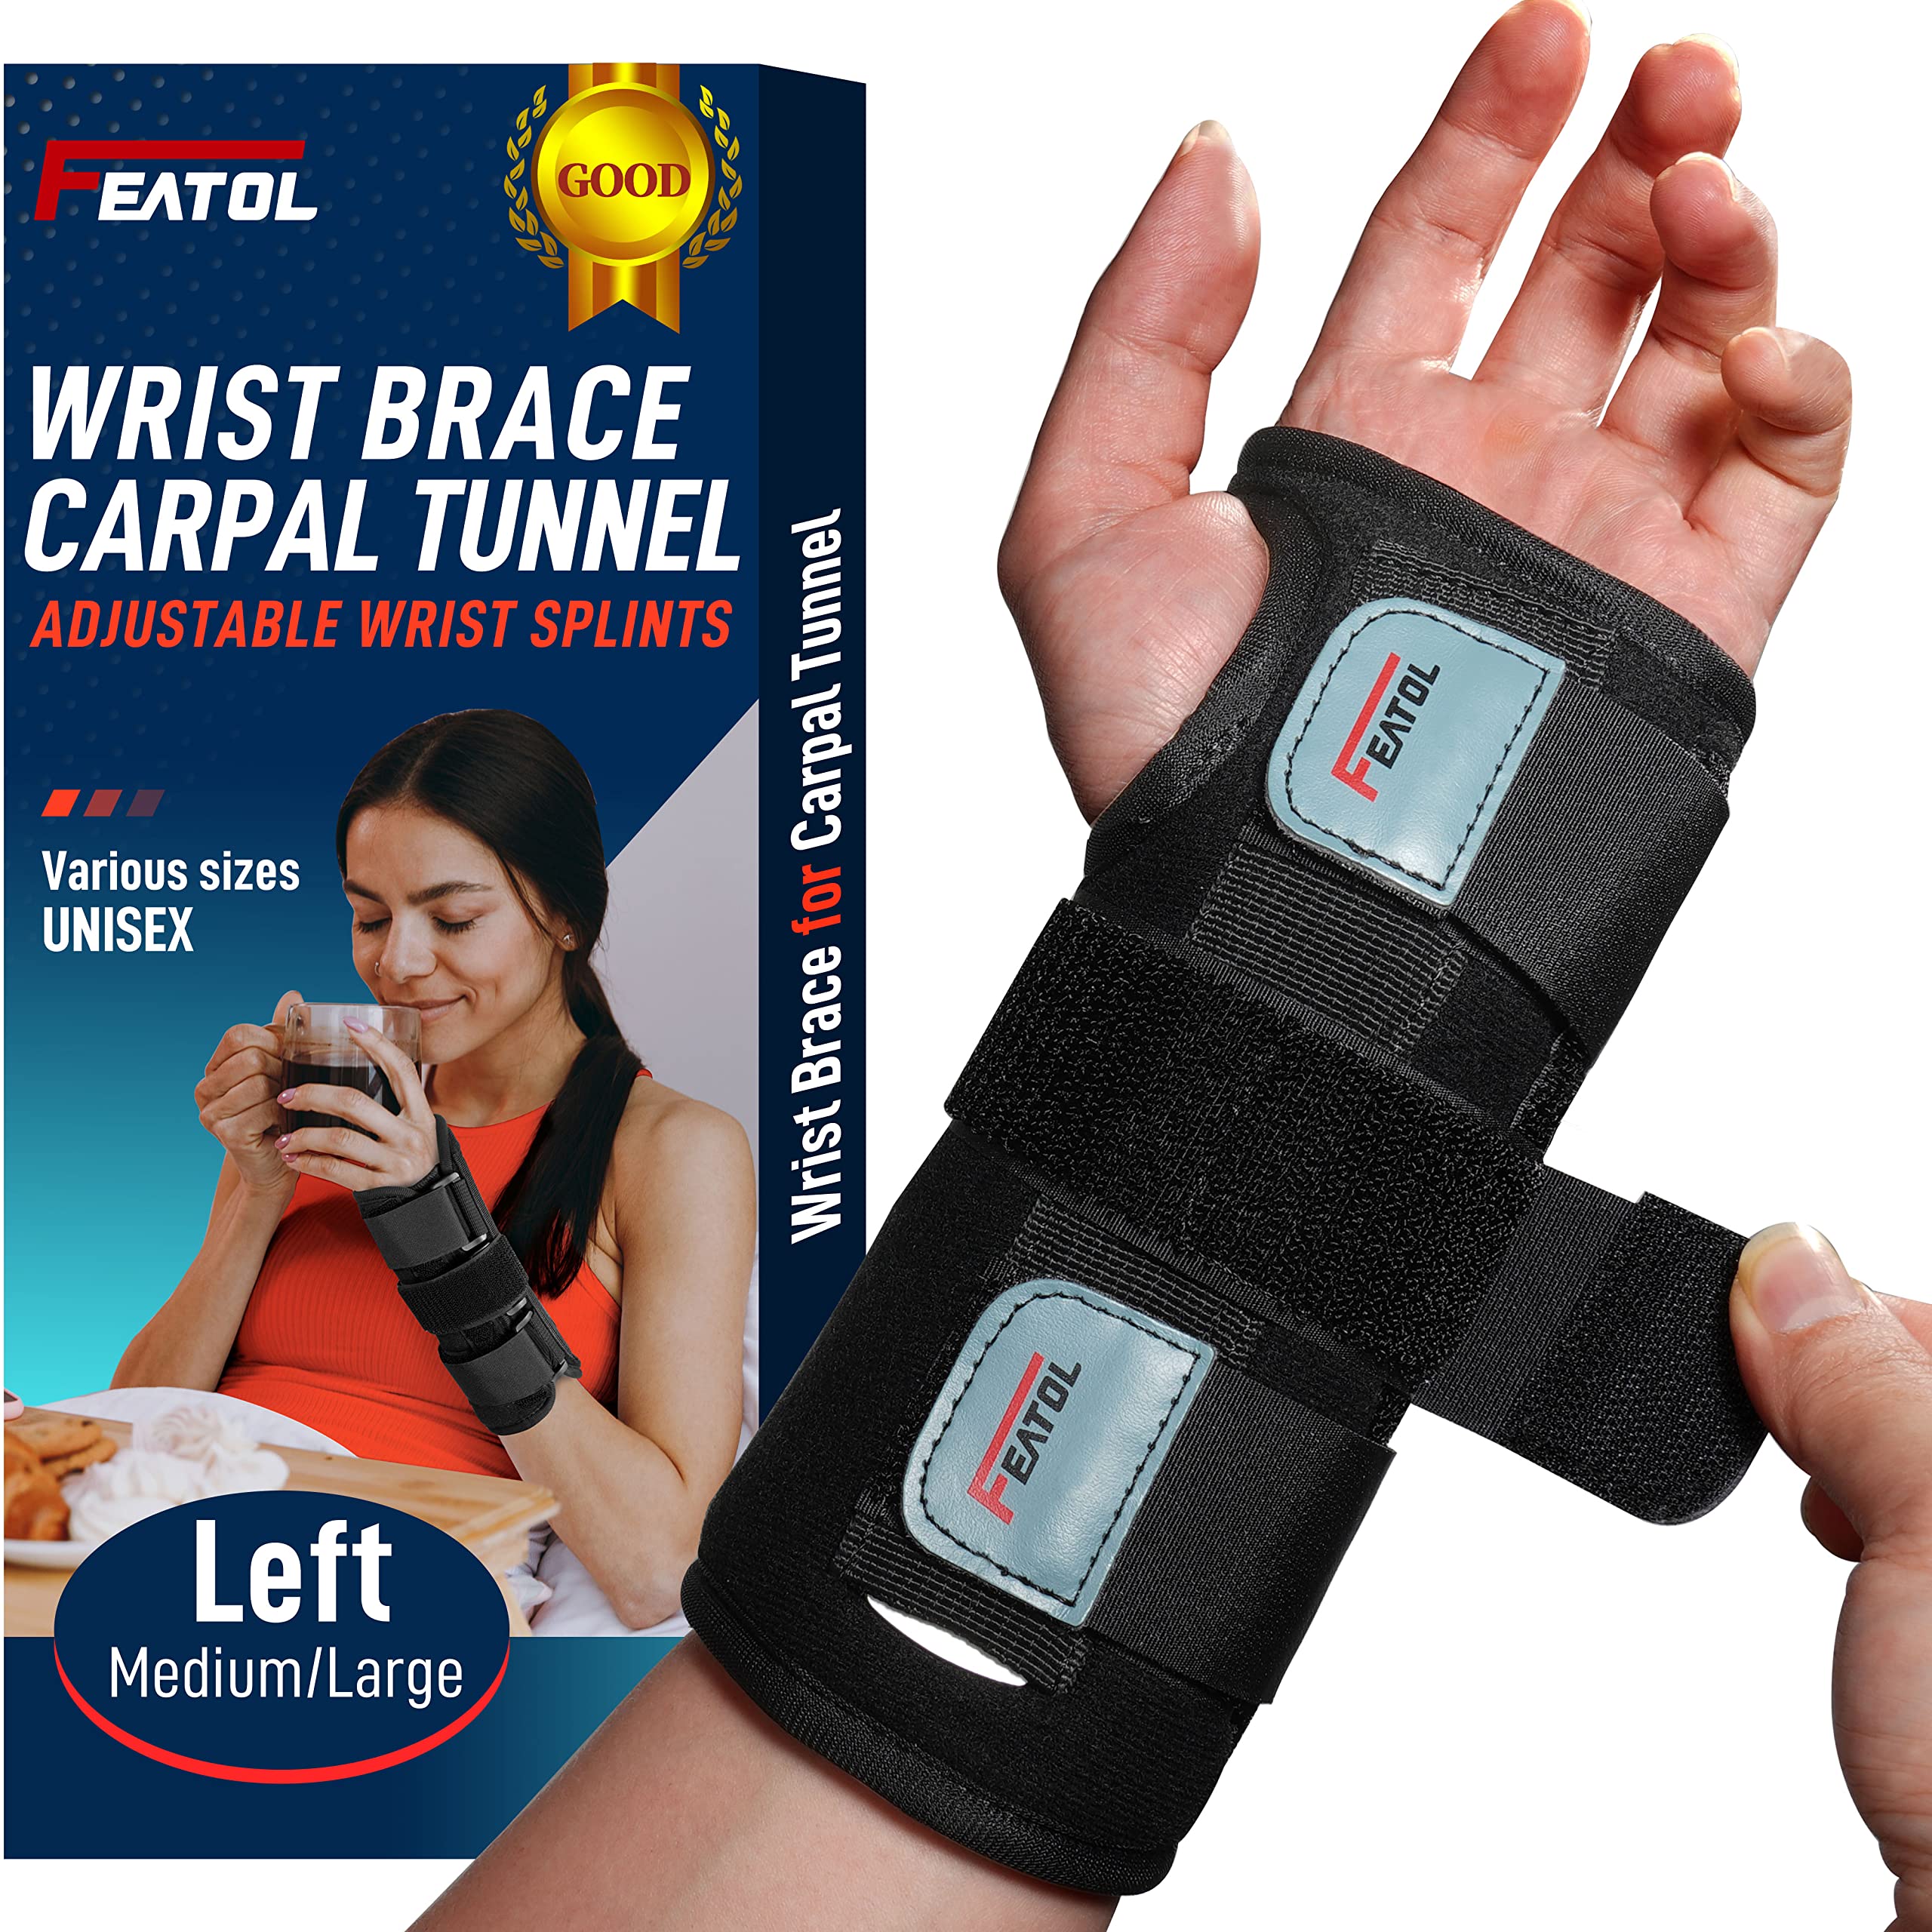 FEATOL Wrist Brace for Carpal Tunnel, Adjustable Wrist Support Brace with Splints Left Hand, Medium/Large, Arm Compression Hand Support for Injuries, Wrist Pain, Sprain, Sport